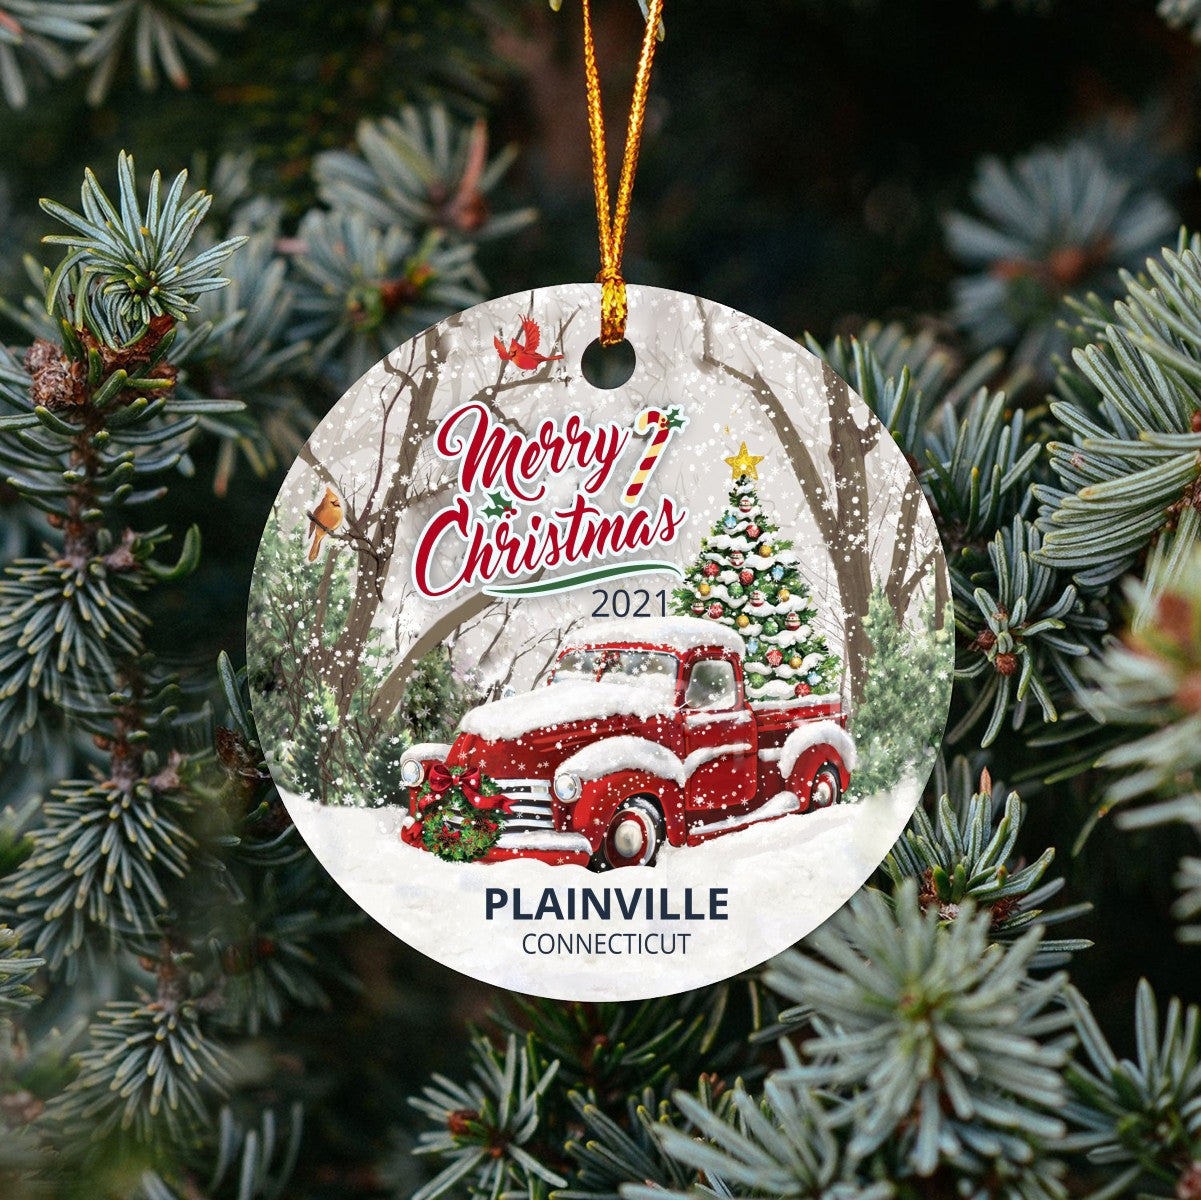 Christmas Tree Ornaments Plainville - Ornament With Name City, State Plainville Connecticut CT Ornament - Red Truck Xmas Ornaments 3'' Plastic Gift For Family, Friend And Housewarming